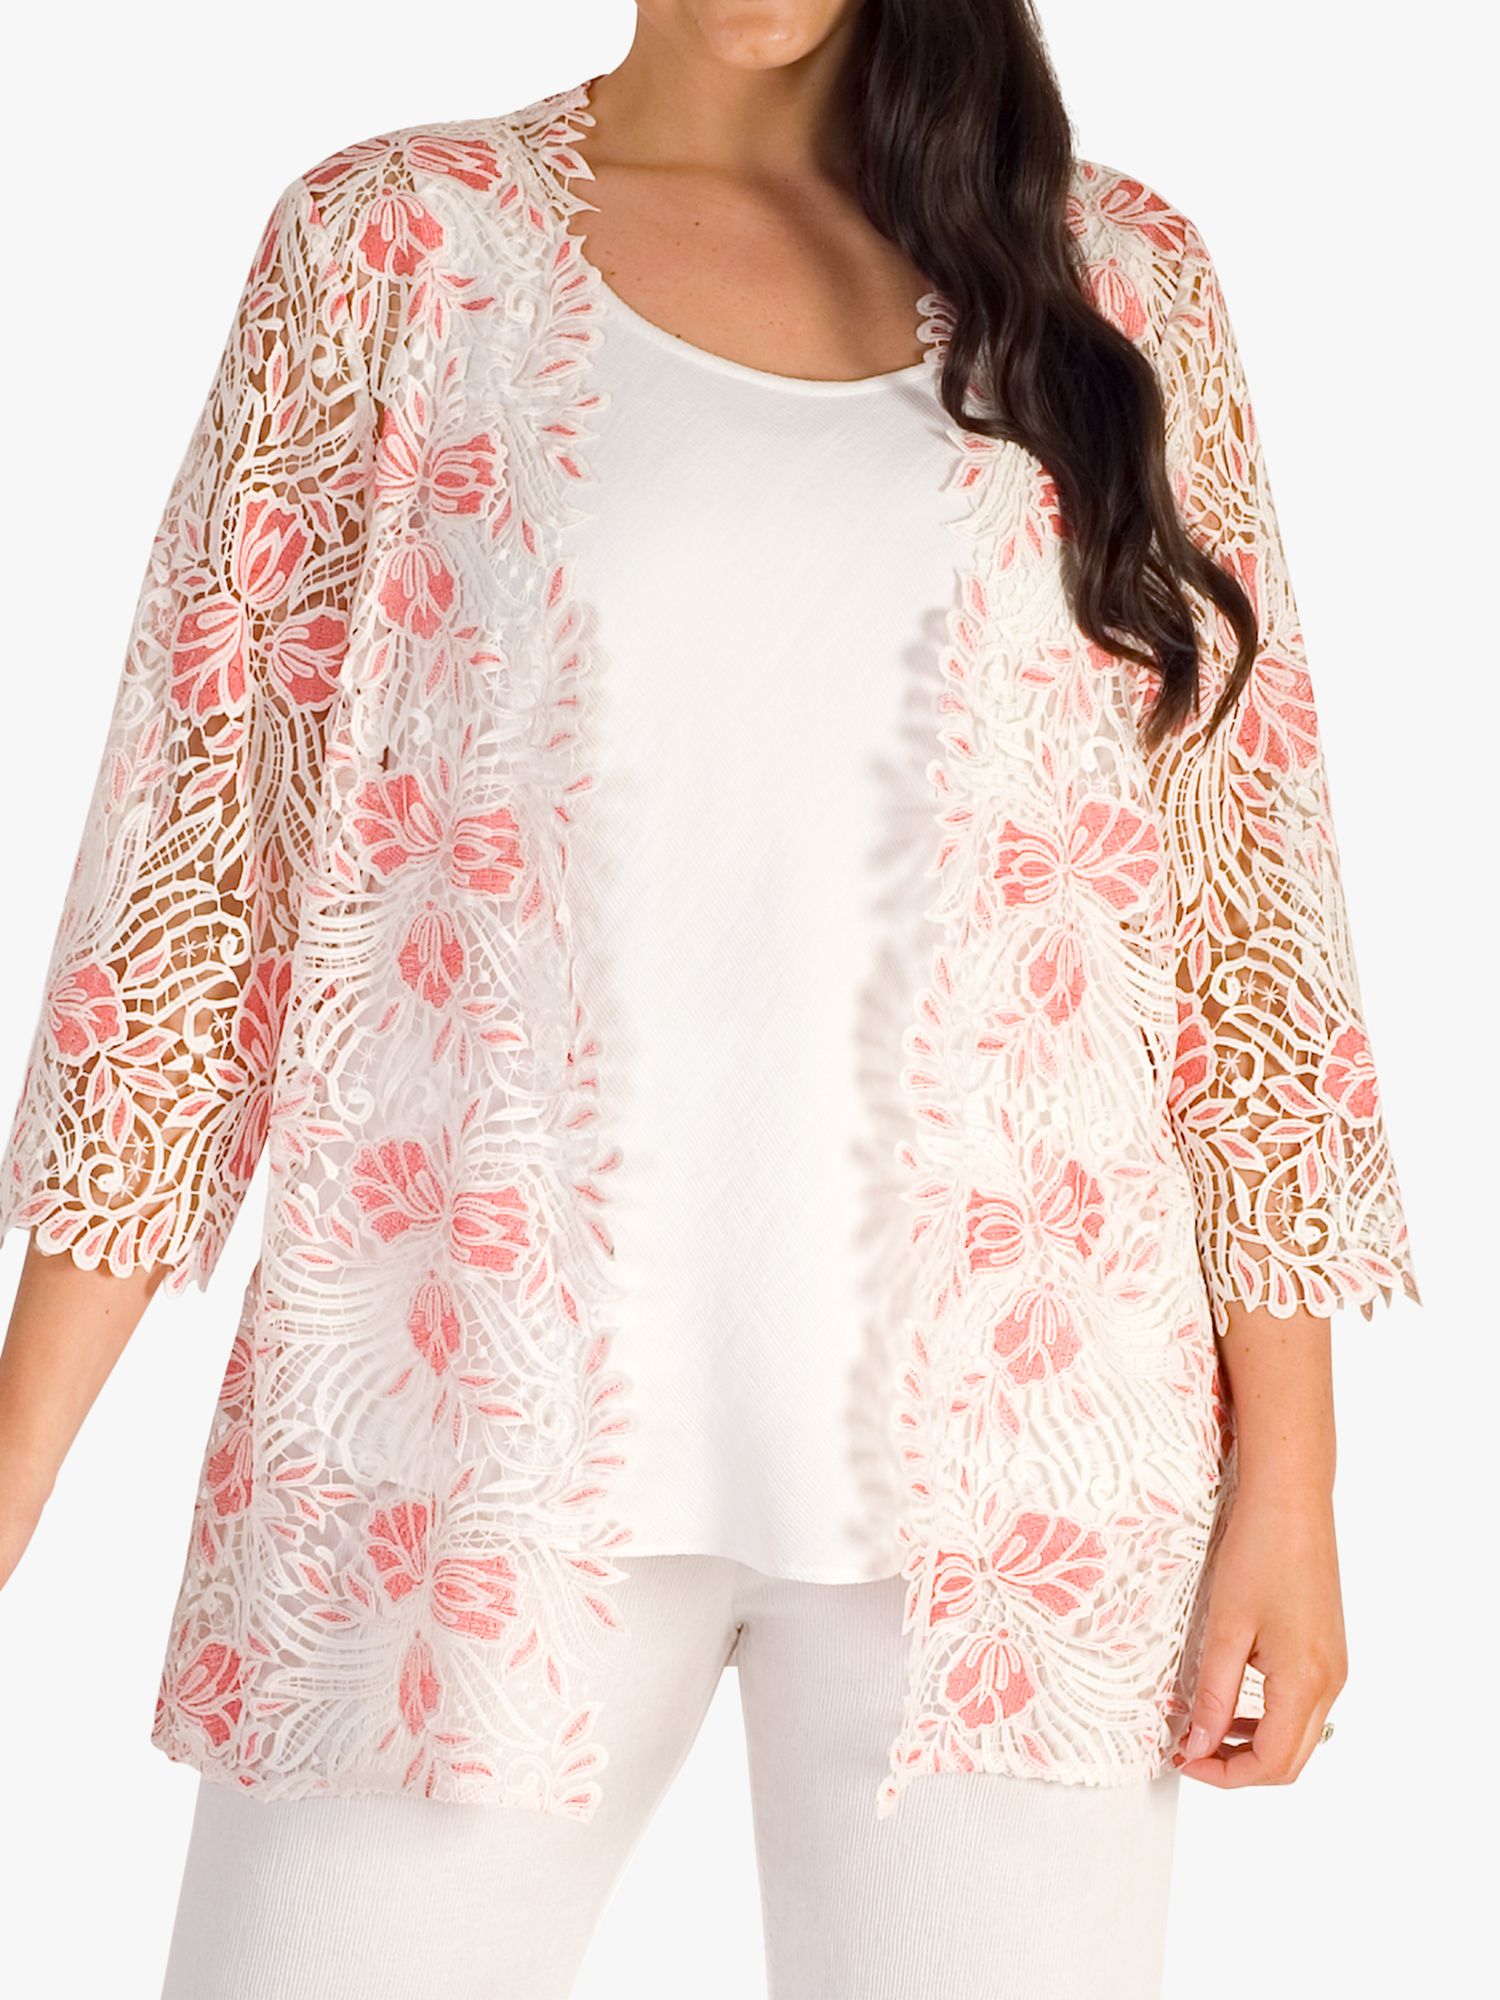 Chesca Gupiere Floral Lace Jacket, White/Coral